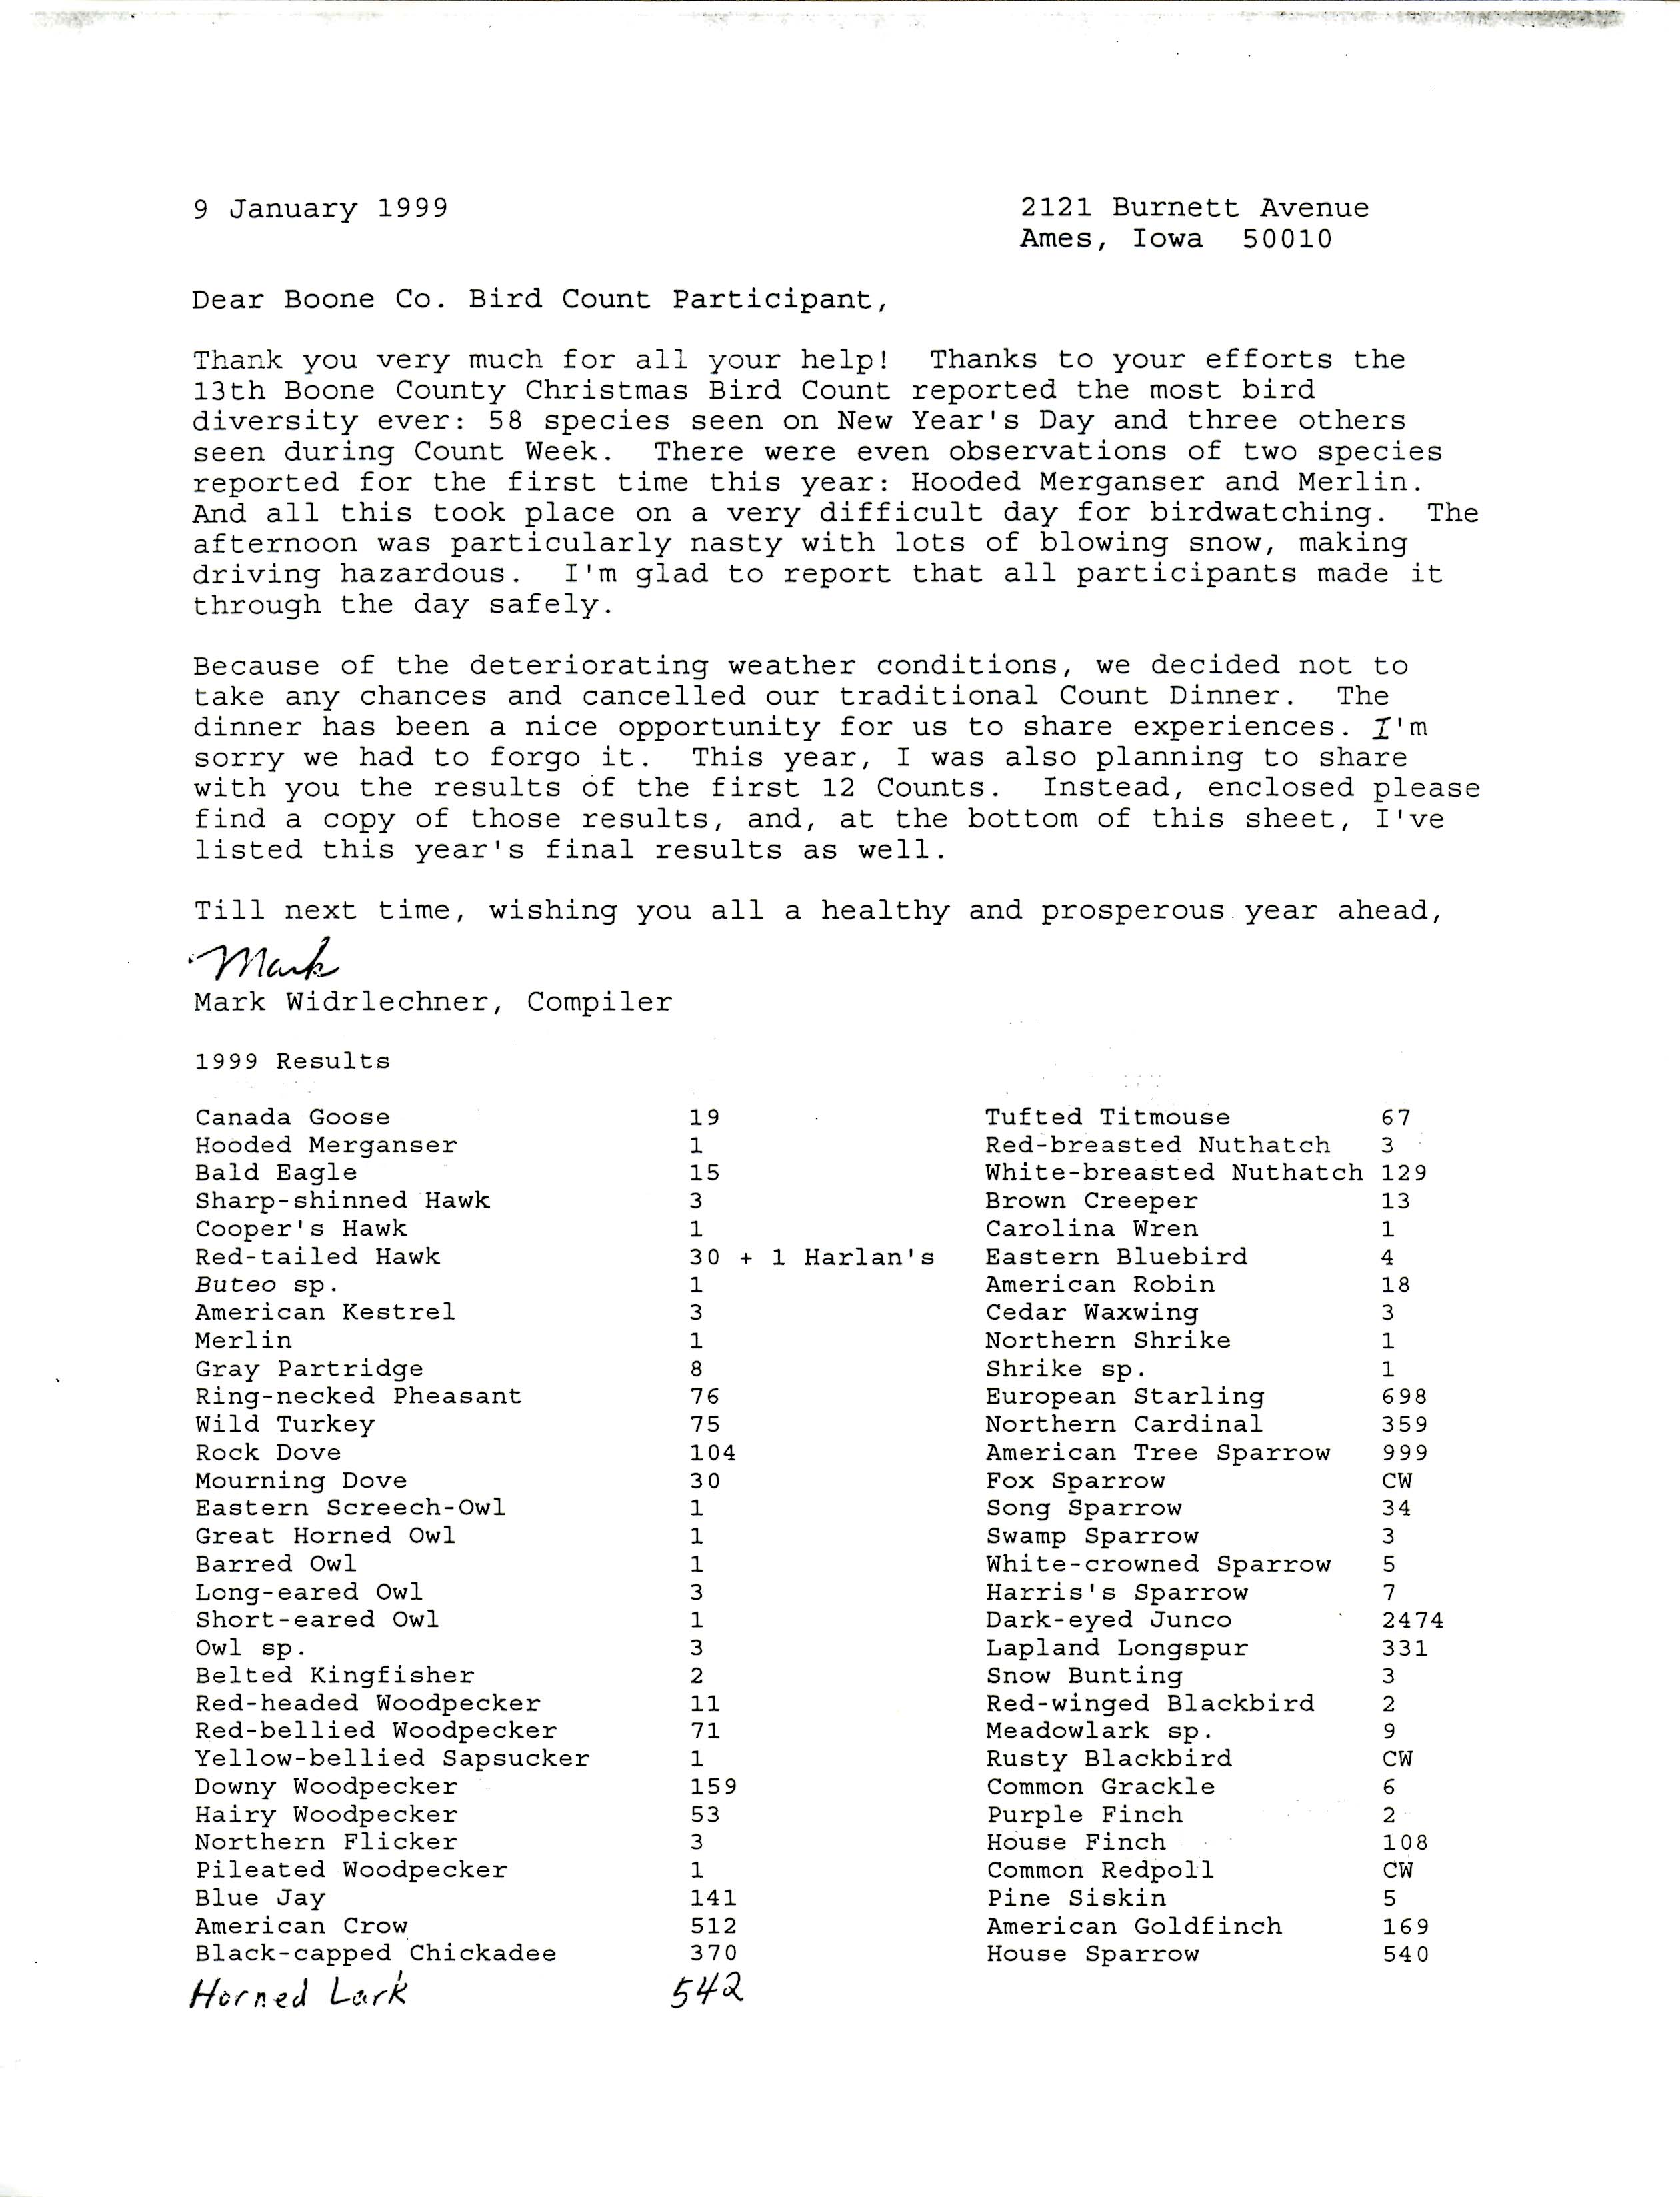 Mark Widrlechner letter to Boone County Bird Count Participants regarding the 1999 Christmas Bird Count results, January 9, 1999